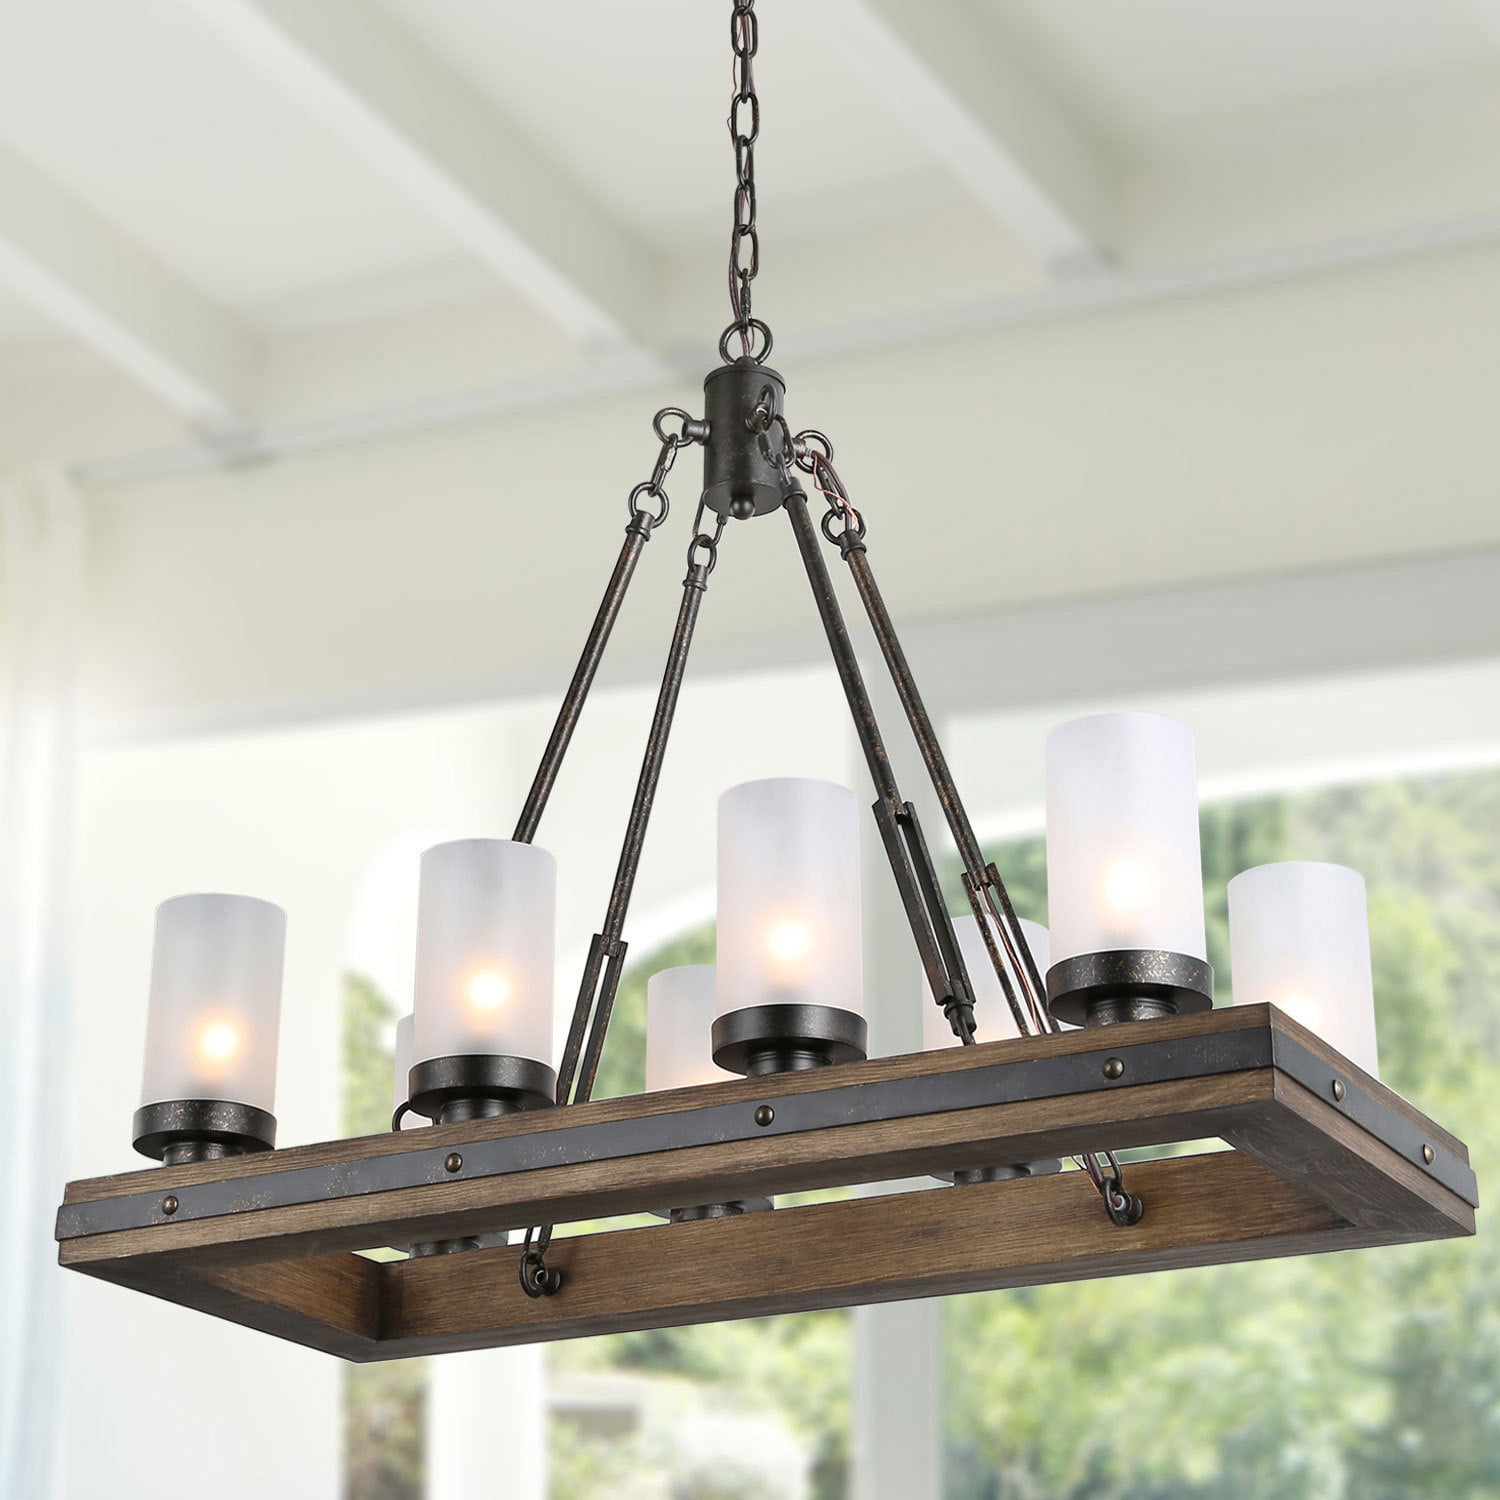 Industrial Reclaimed Wood from Early-1900s Farmhouse Lighting Rustic Lighting for Kitchen Island Lighting and Billiard Table-Wooden Light with Edison Cages Bar Dining Room